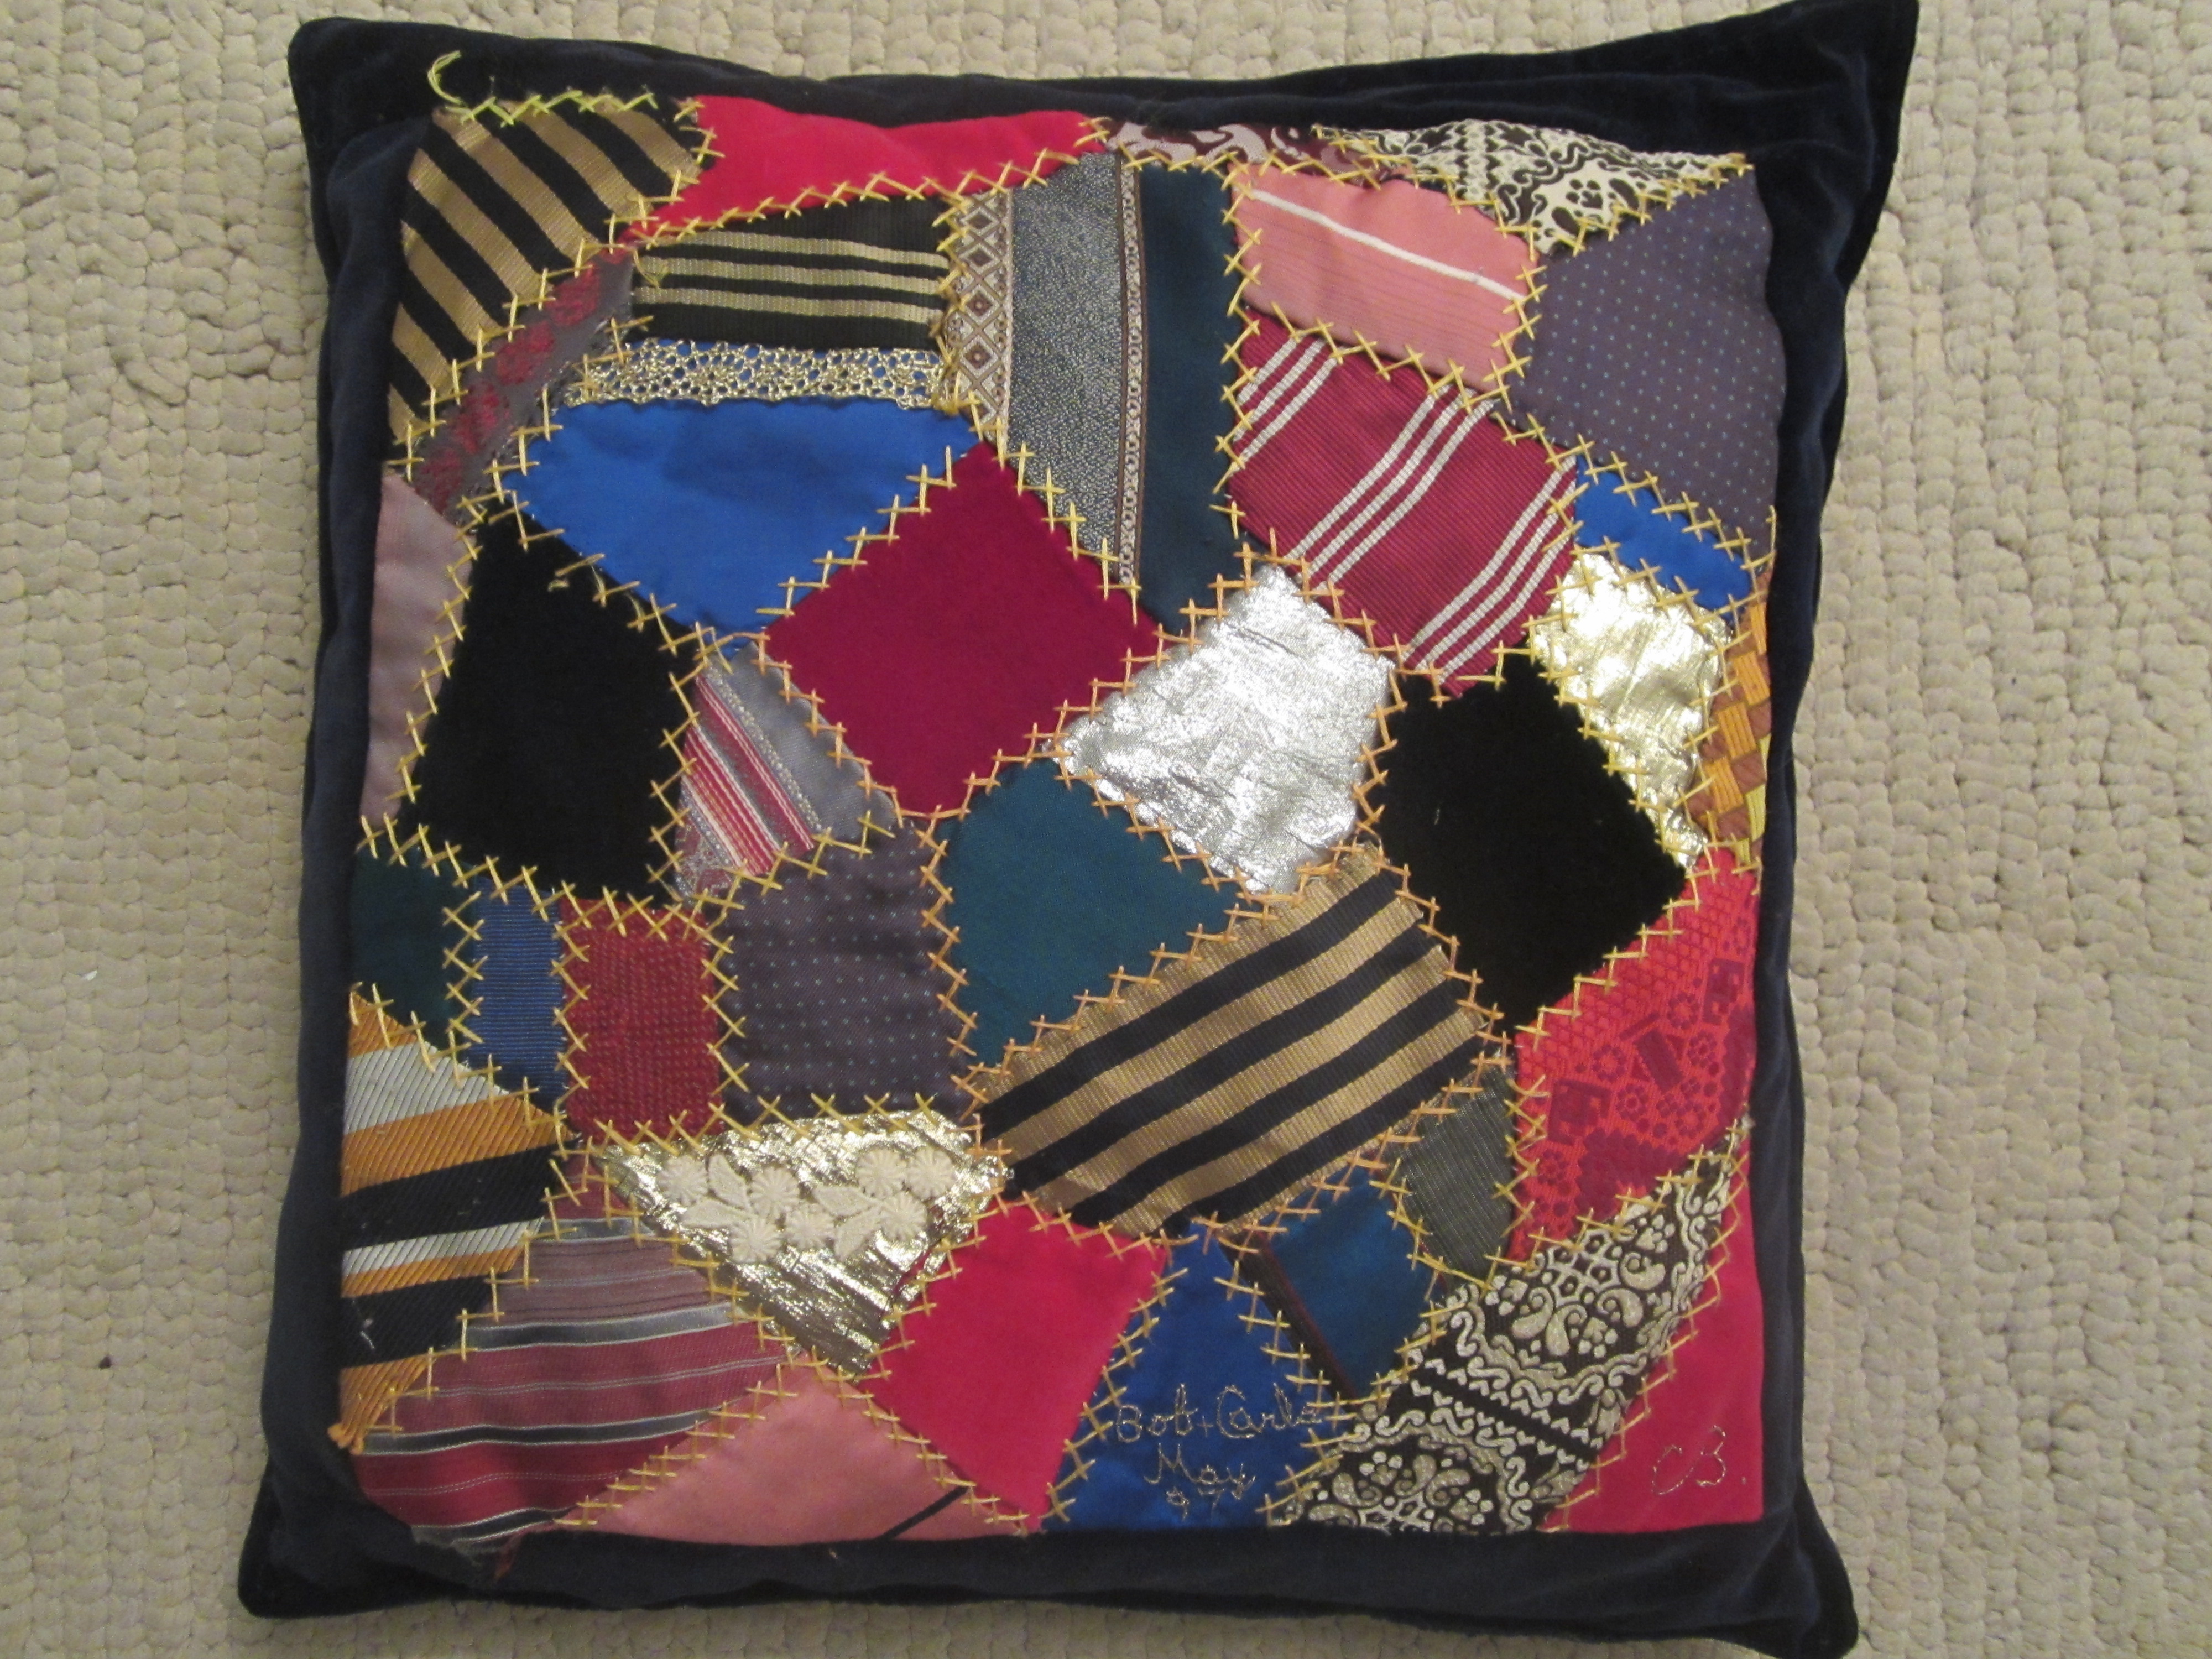 Crazy quilt made from men's ties by Connie Bowers